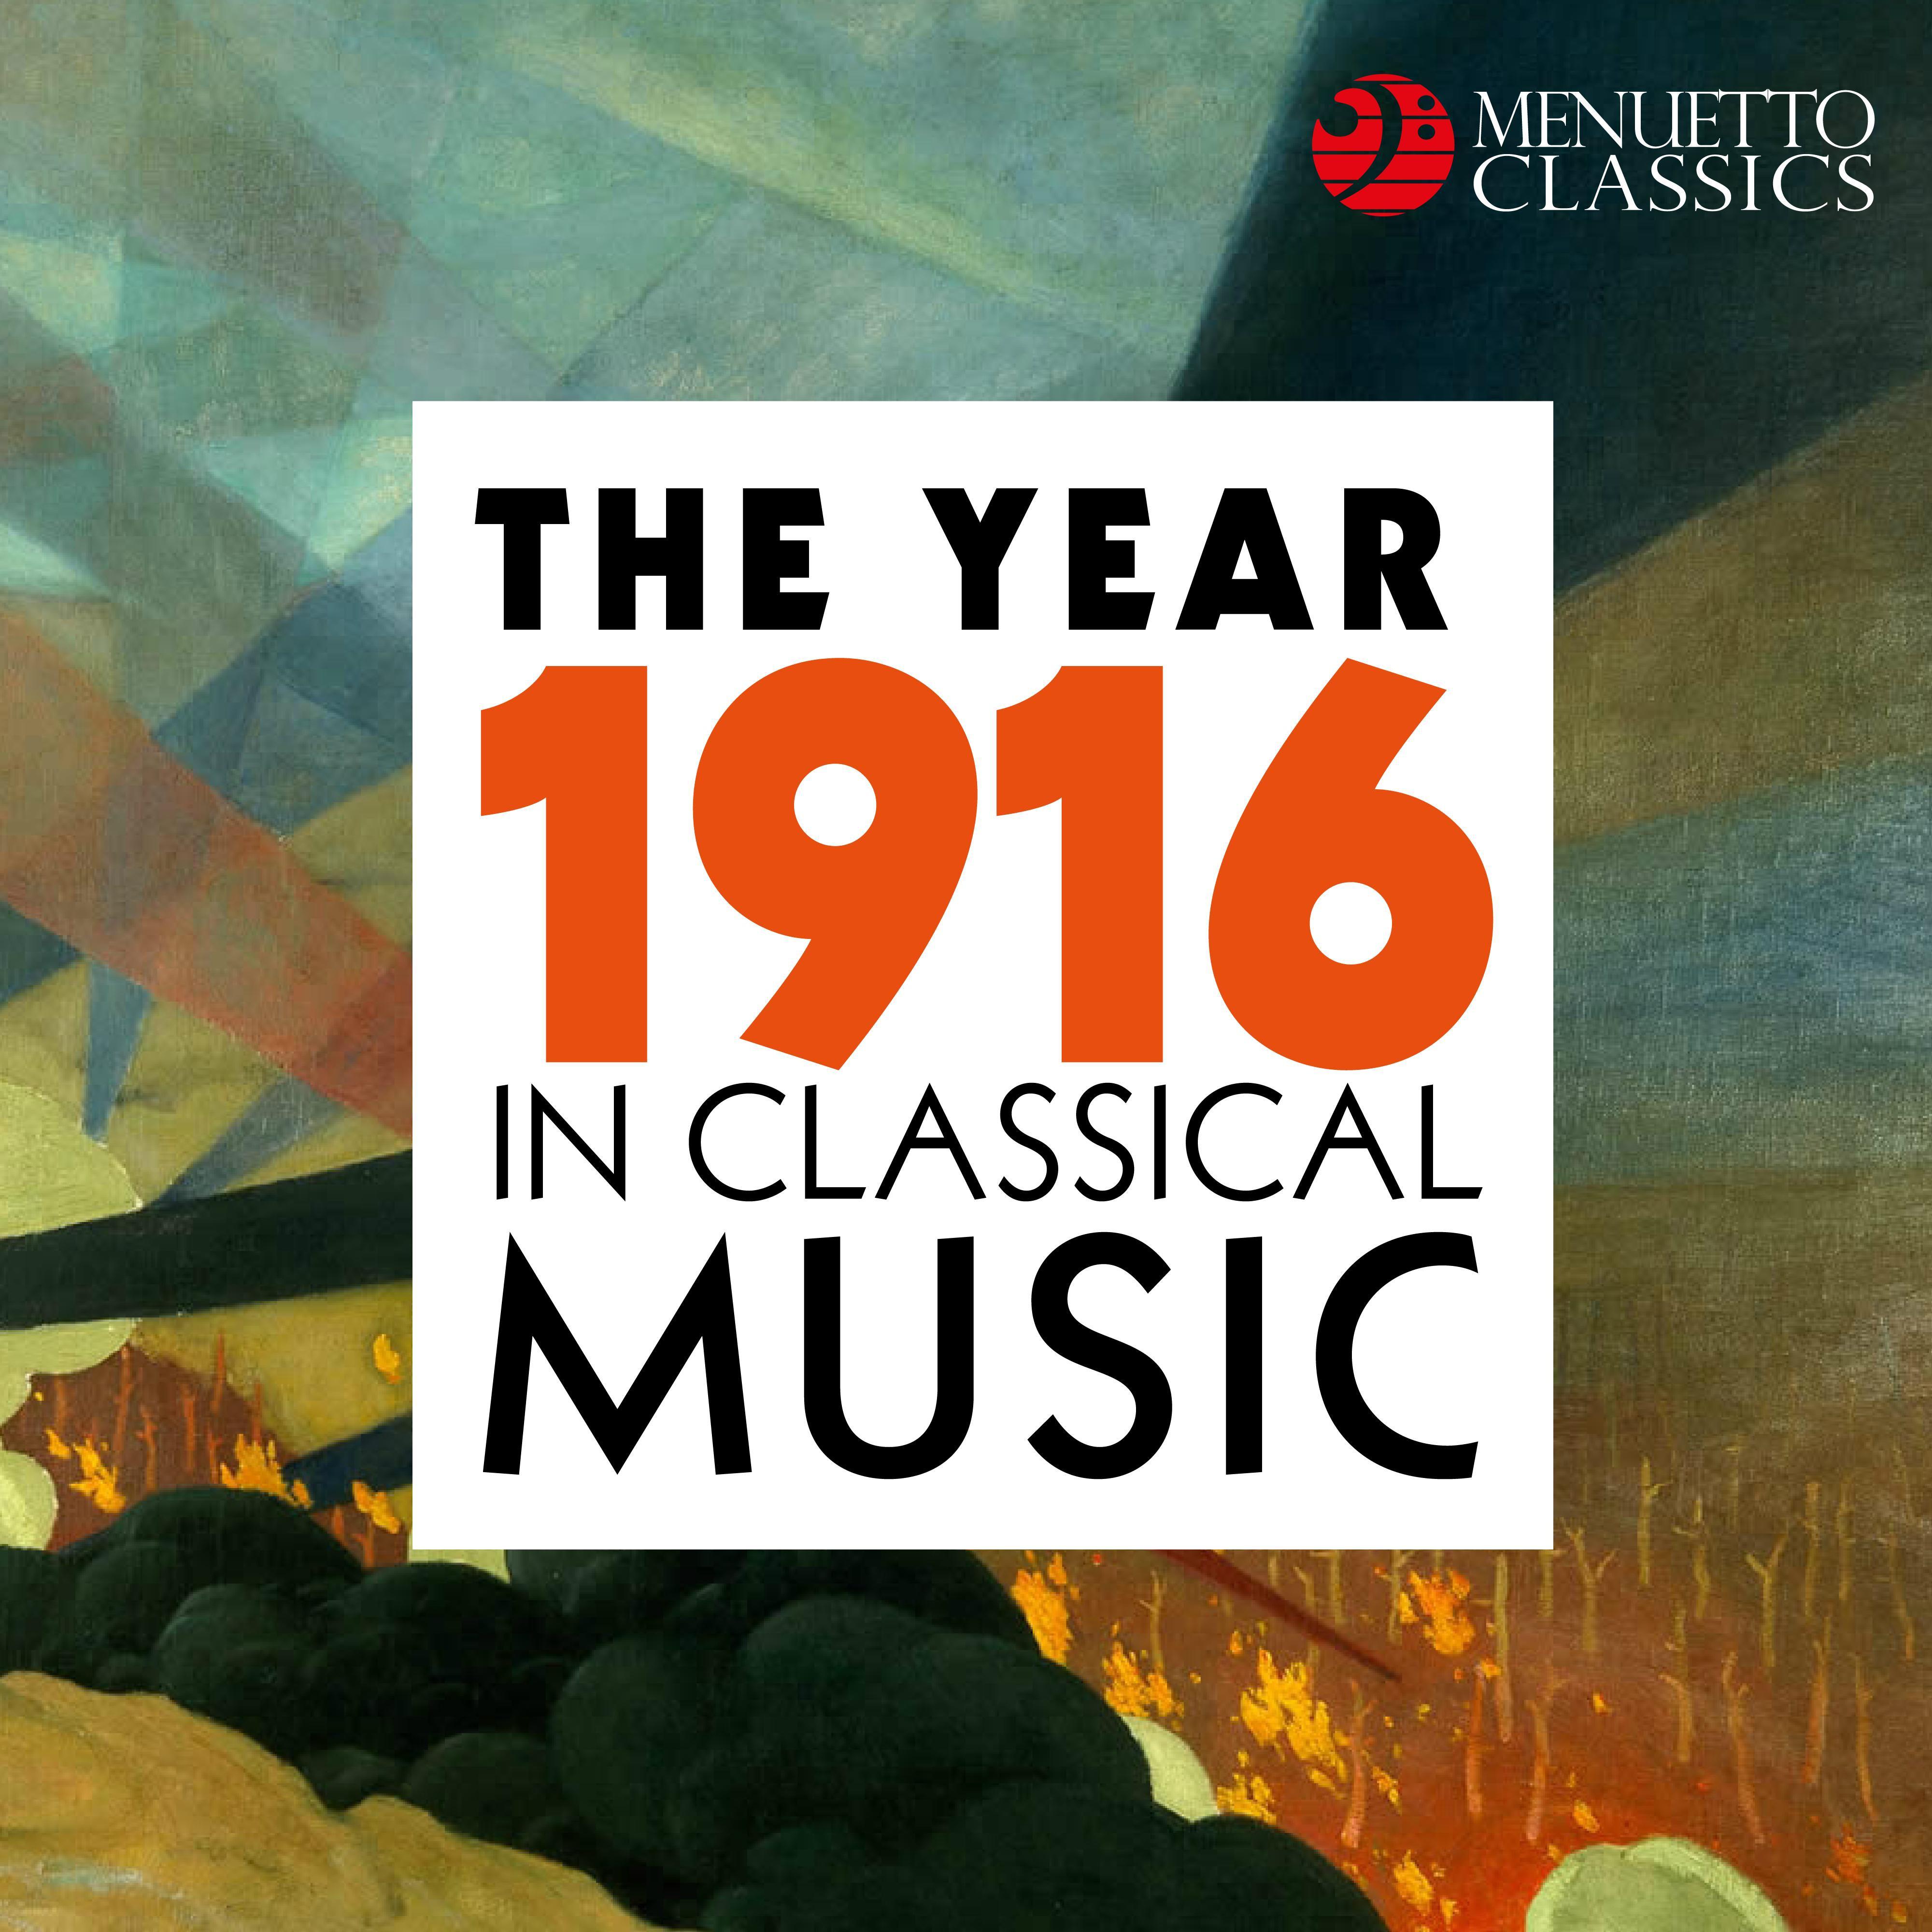 The Planets, Suite for Large Orchestra, Op. 32: I. Mars, the Bringer of War